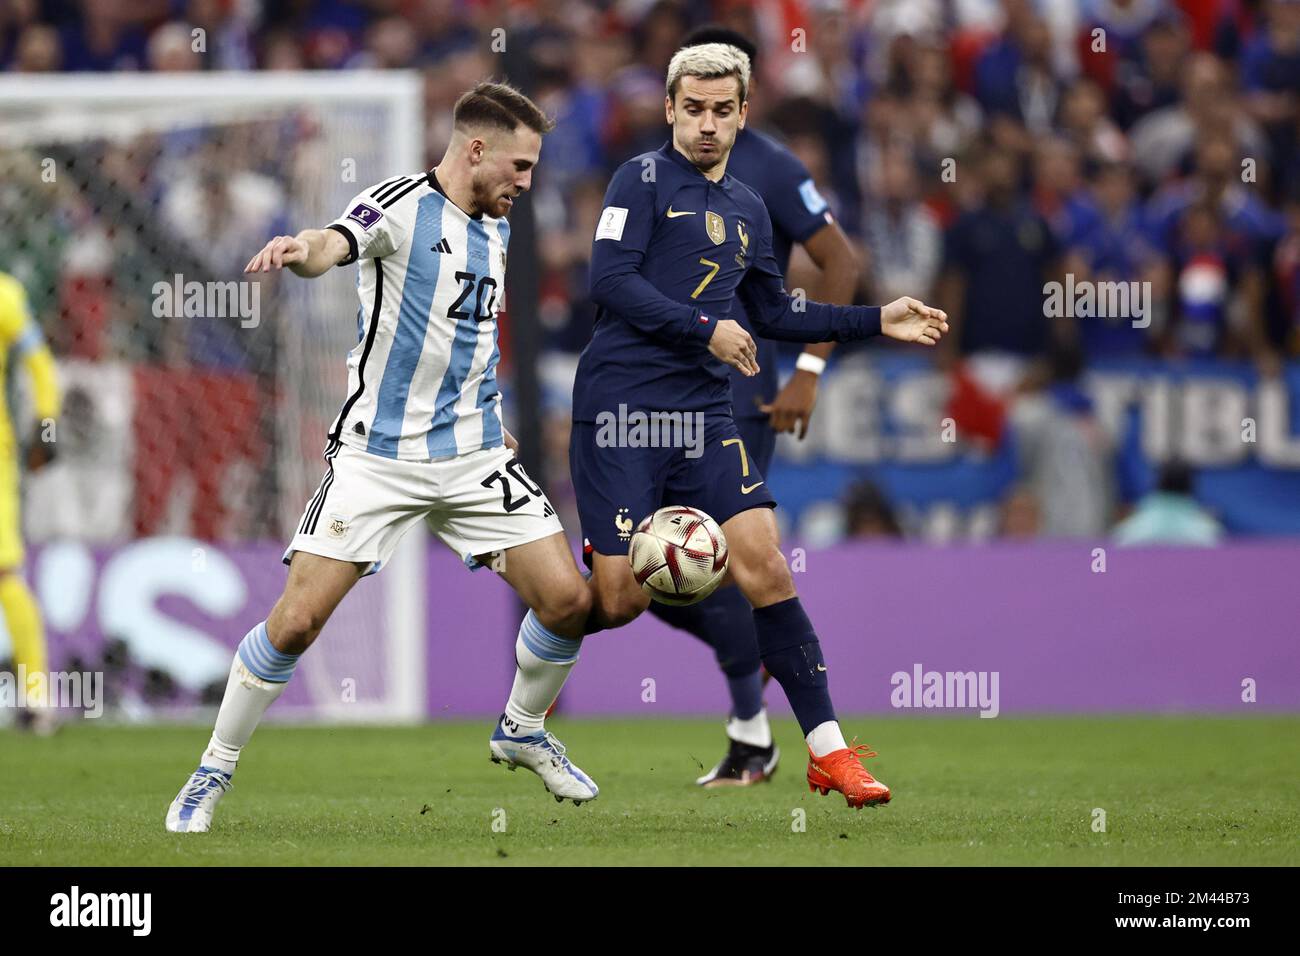 AL DAAYEN - (l-r) Alexis Mac Allister of Argentina, Antoine Griezmann of France during the FIFA World Cup Qatar 2022 final match between Argentina and France at Lusail Stadium on December 18, 2022 in Al Daayen, Qatar. AP | Dutch Height | MAURICE OF STONE Stock Photo